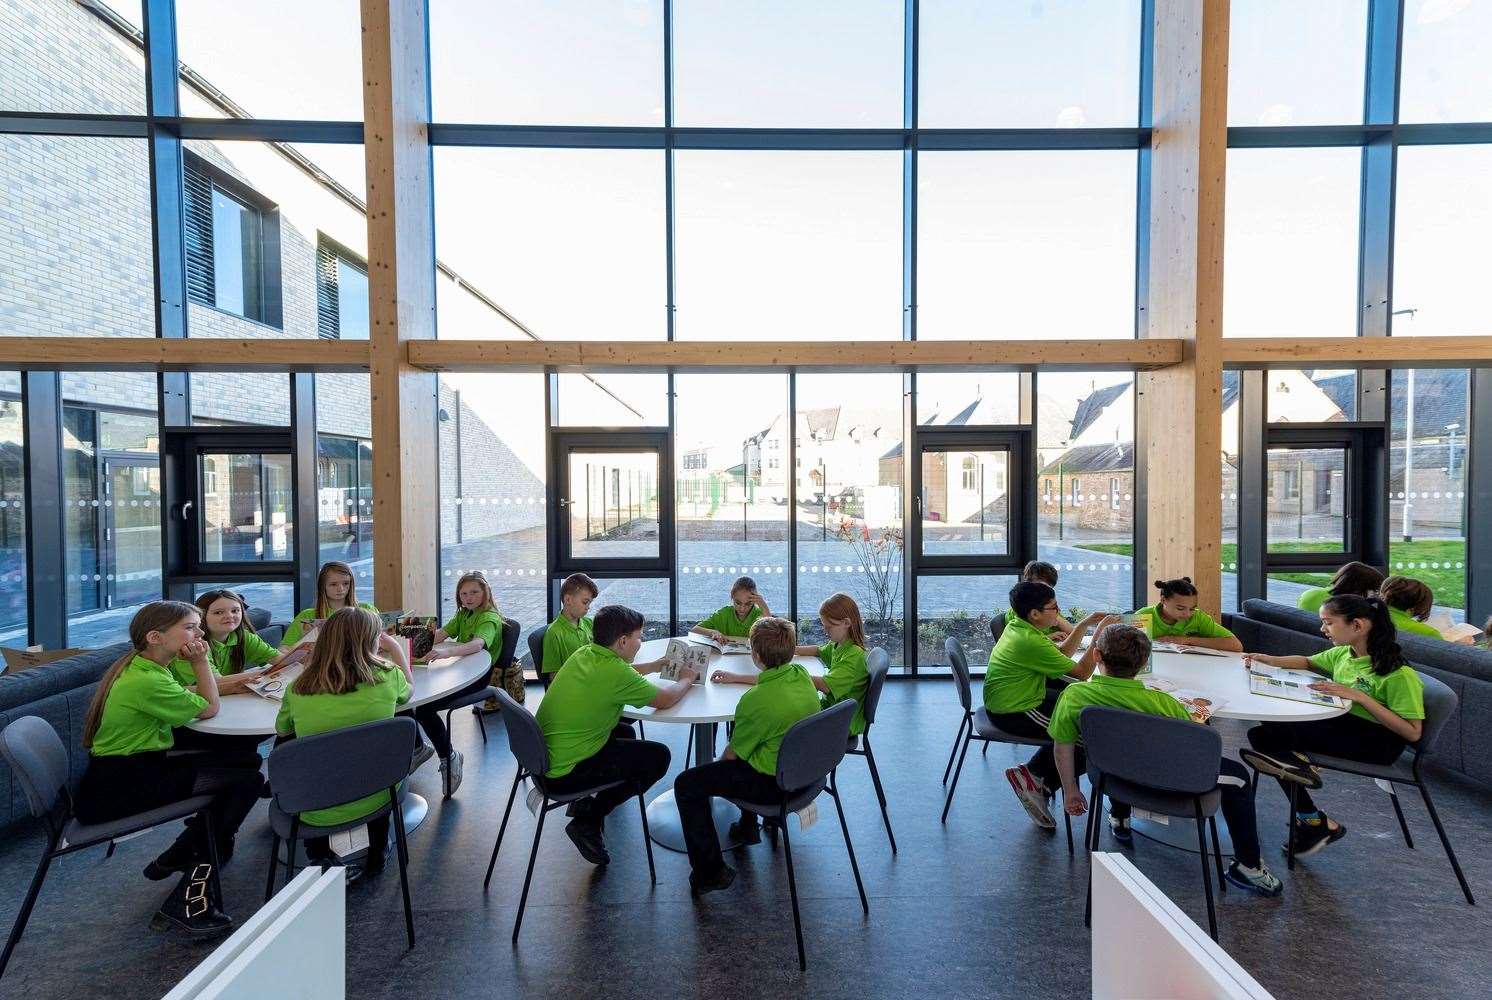 Merkinch Primary School library was completed by Robertson Construction.